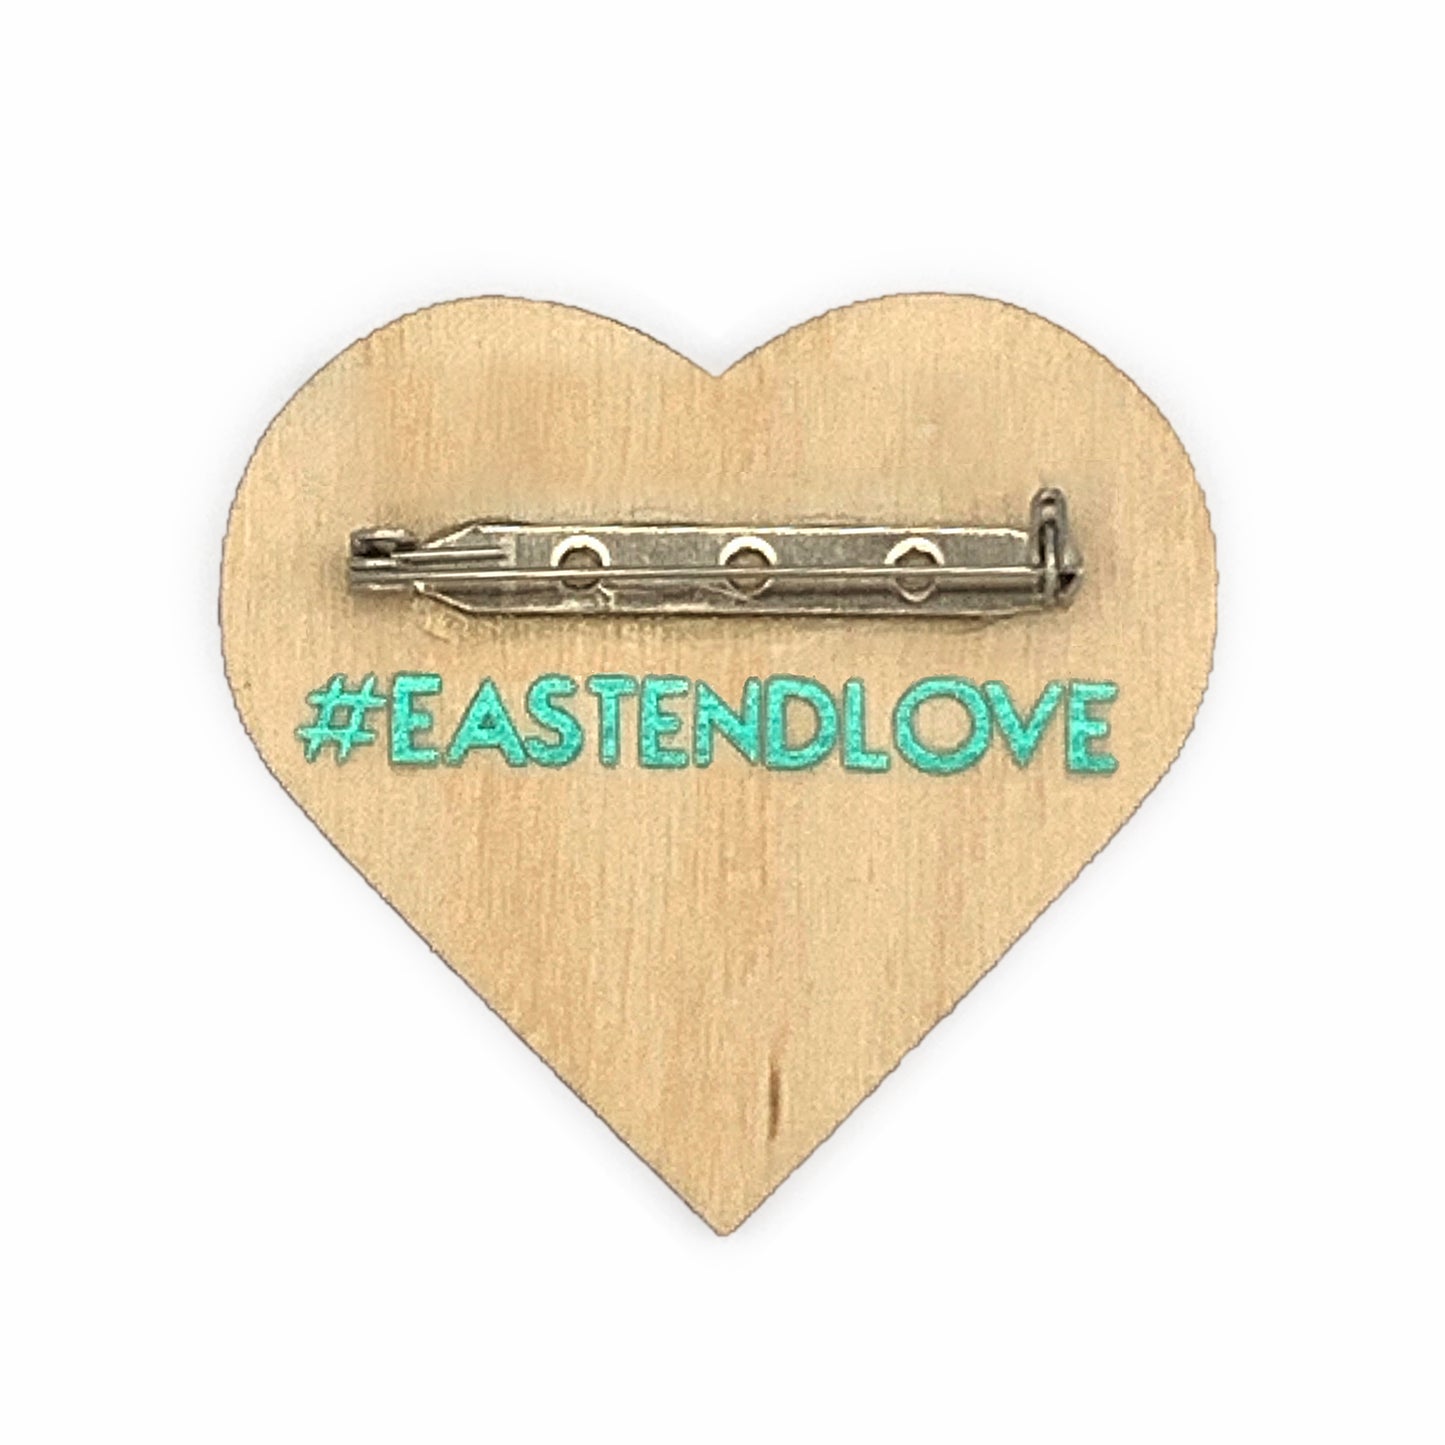 #EastEndLove handmade pin, metallic teal east-end-map heart on wood base - back with teal #EastEndLove text and secure locking bar pin